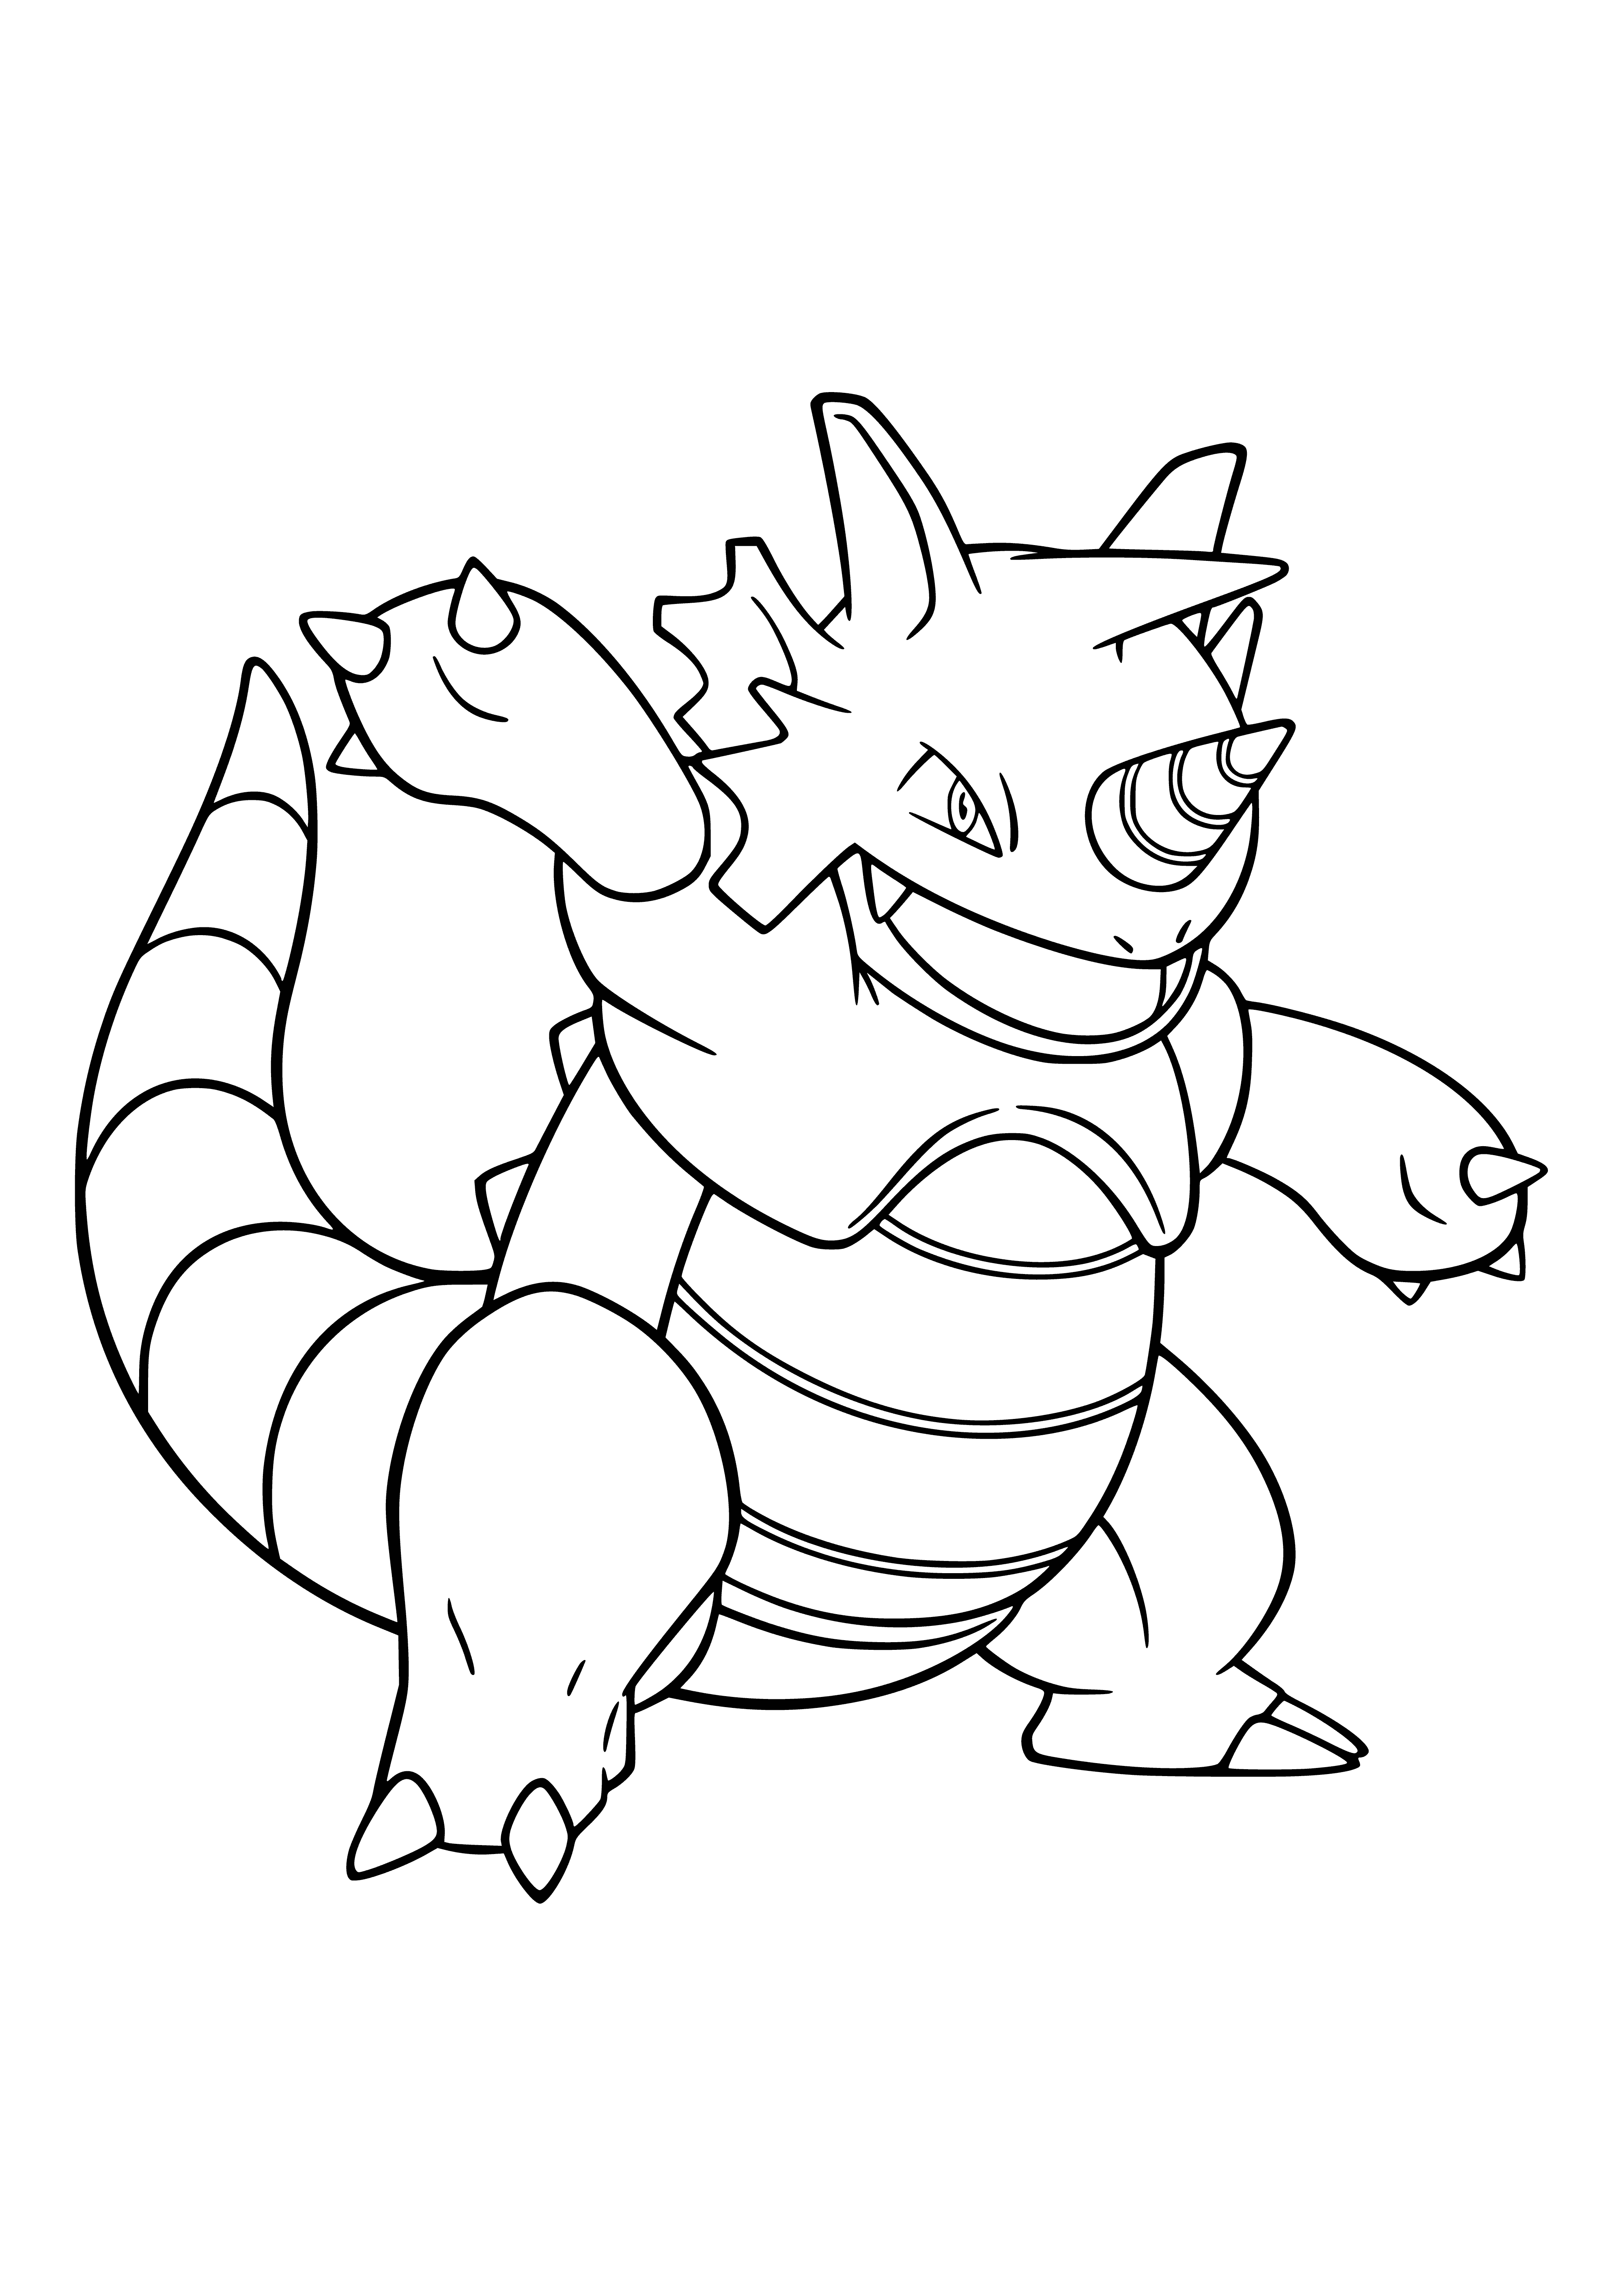 coloring page: Rajdon: Mass. poke w/tough hide, long tail, sharp claws, huge head, two horns, dark eyes, sharp teeth. Grey, dk saddl, lght face/belly.